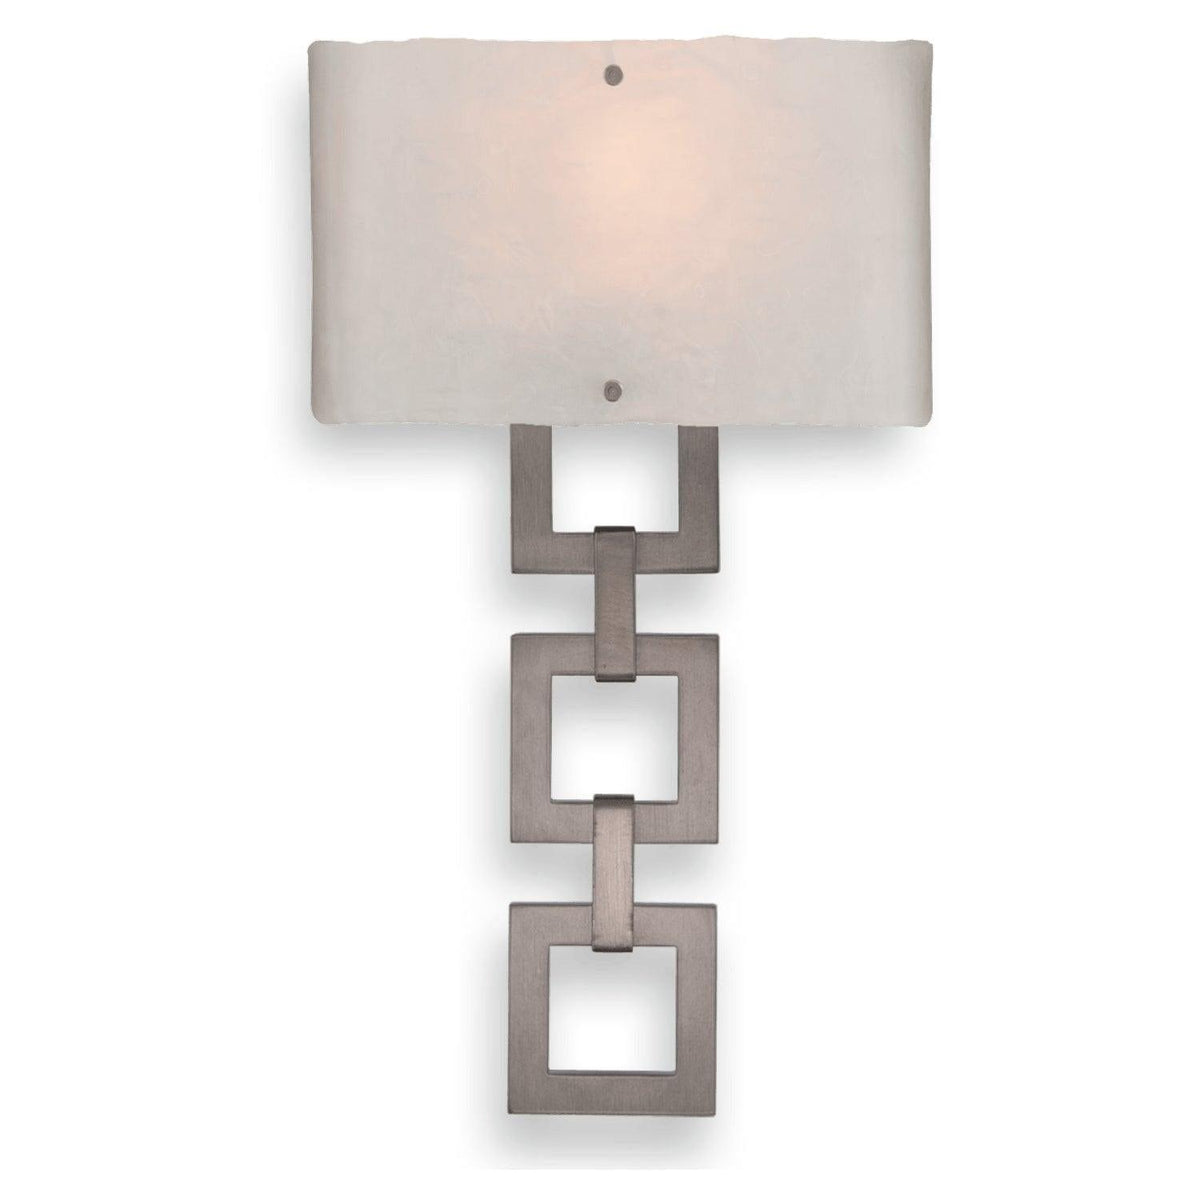 Hammerton Studio - Carlyle Square Link Cover Sconce - CSB0033-0B-SN-FG-E2 | Montreal Lighting & Hardware